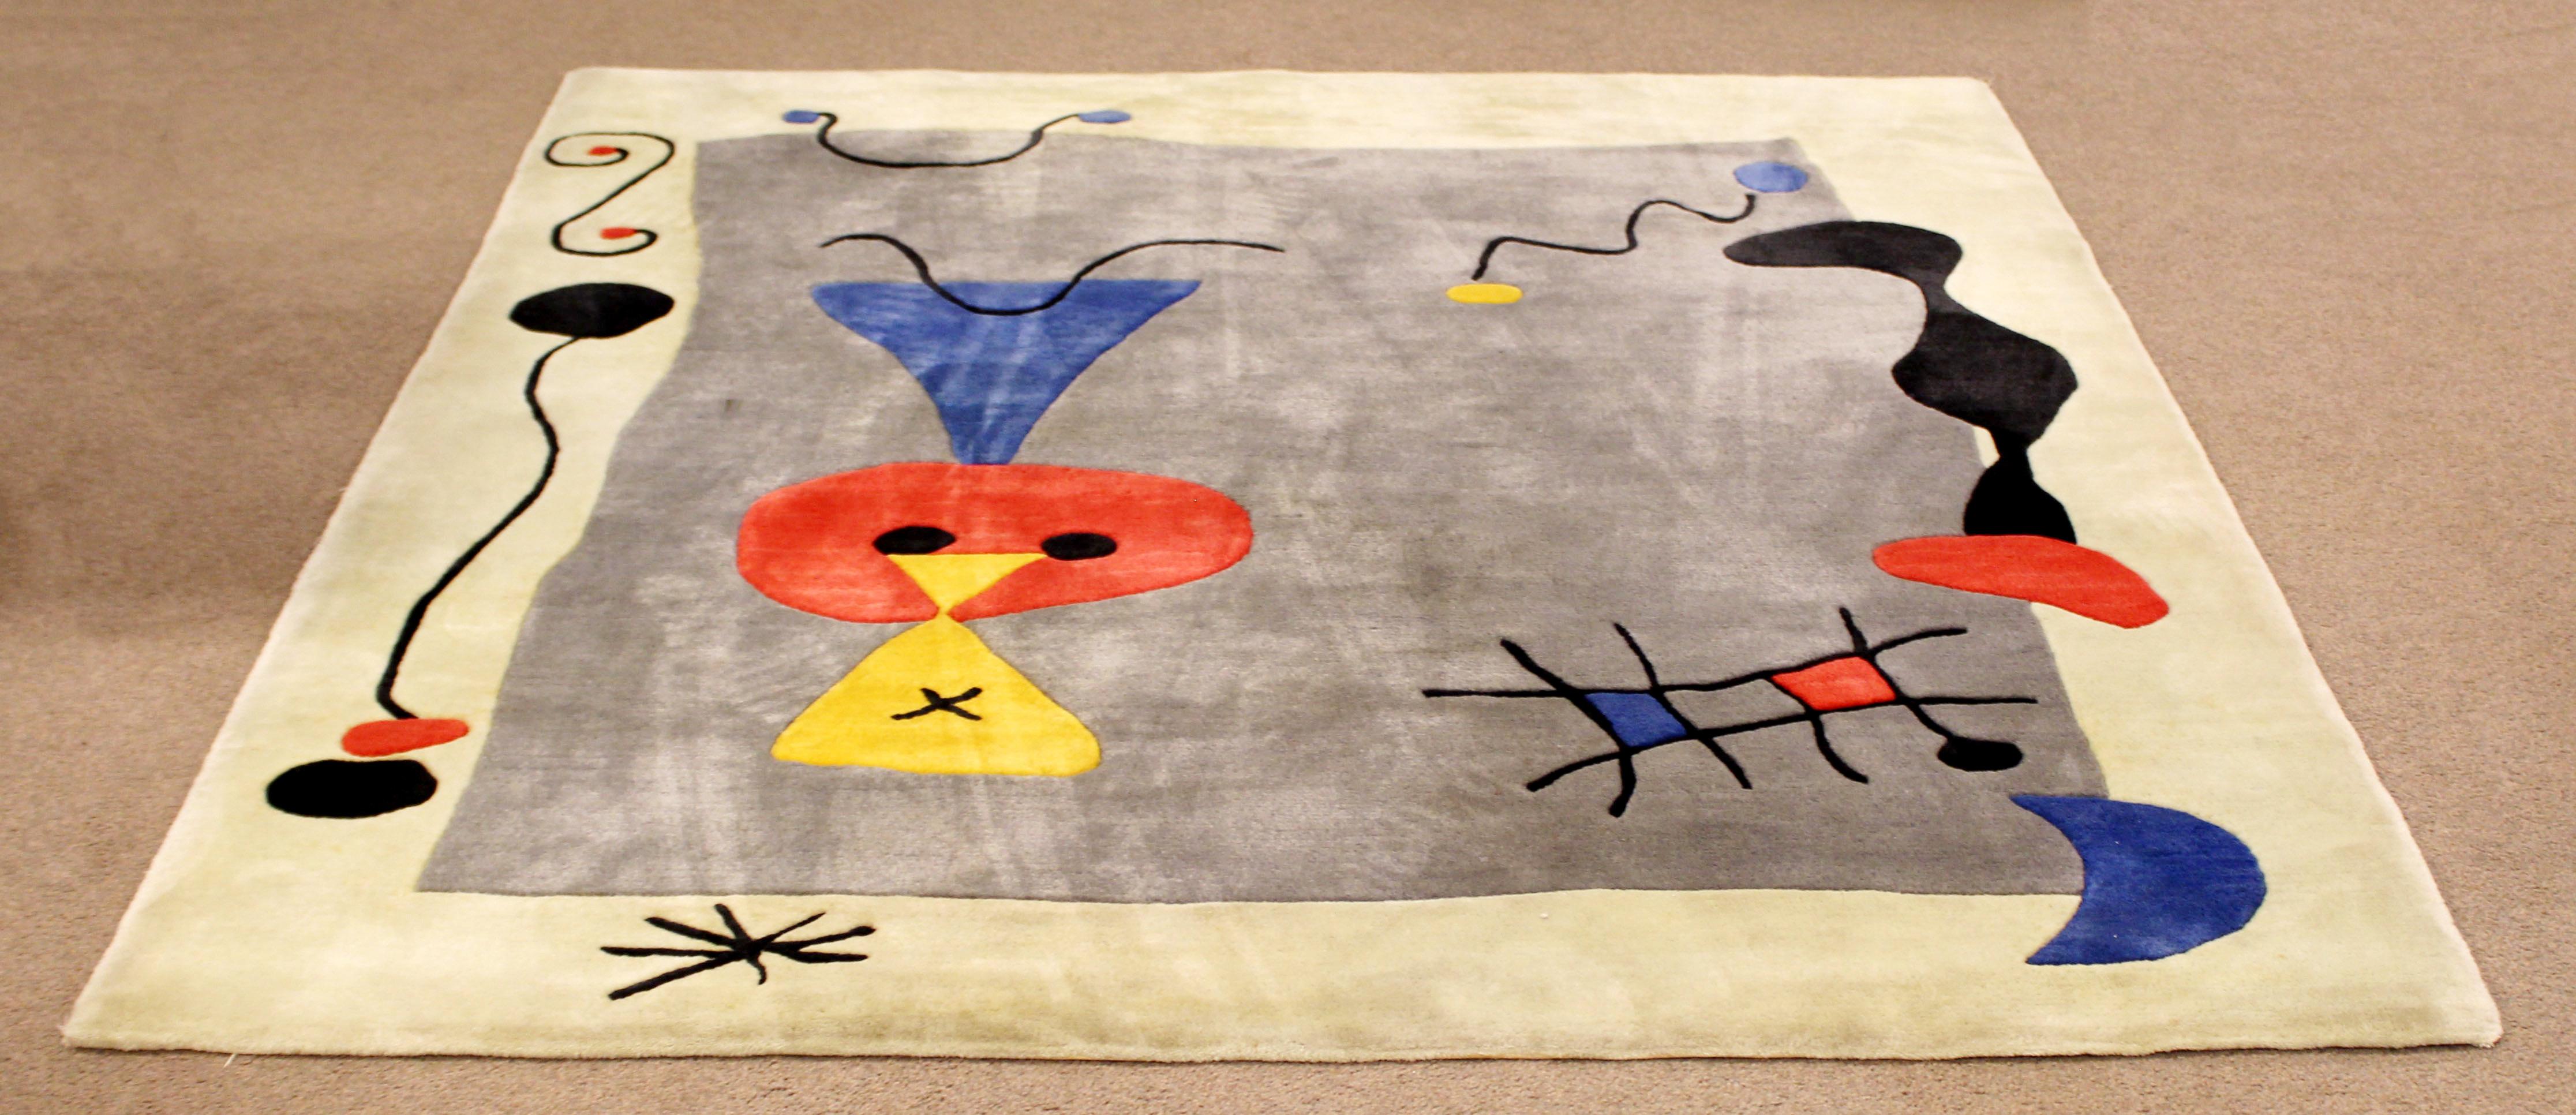 For your consideration is a wonderful, 100% wool, abstract art area rug or wall tapestry Miro design, circa 1960s. In vintage condition. The dimensions are 72